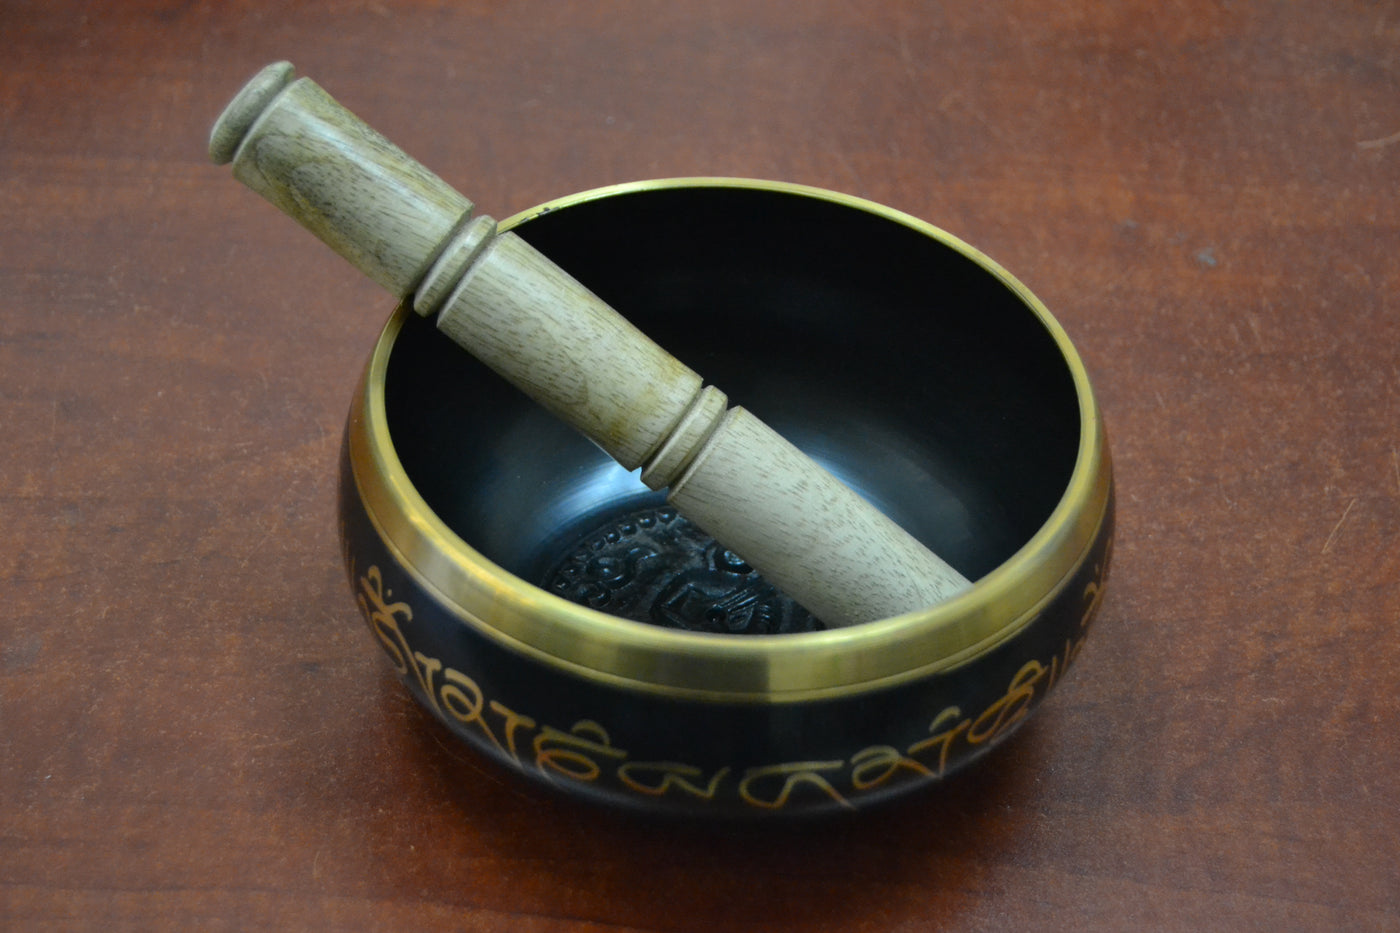 Handmade Nepal Tibetan Buddhist Brass Singing Bowl - Roses & Chains | Fashionable Clothing, Shoes, Accessories, & More